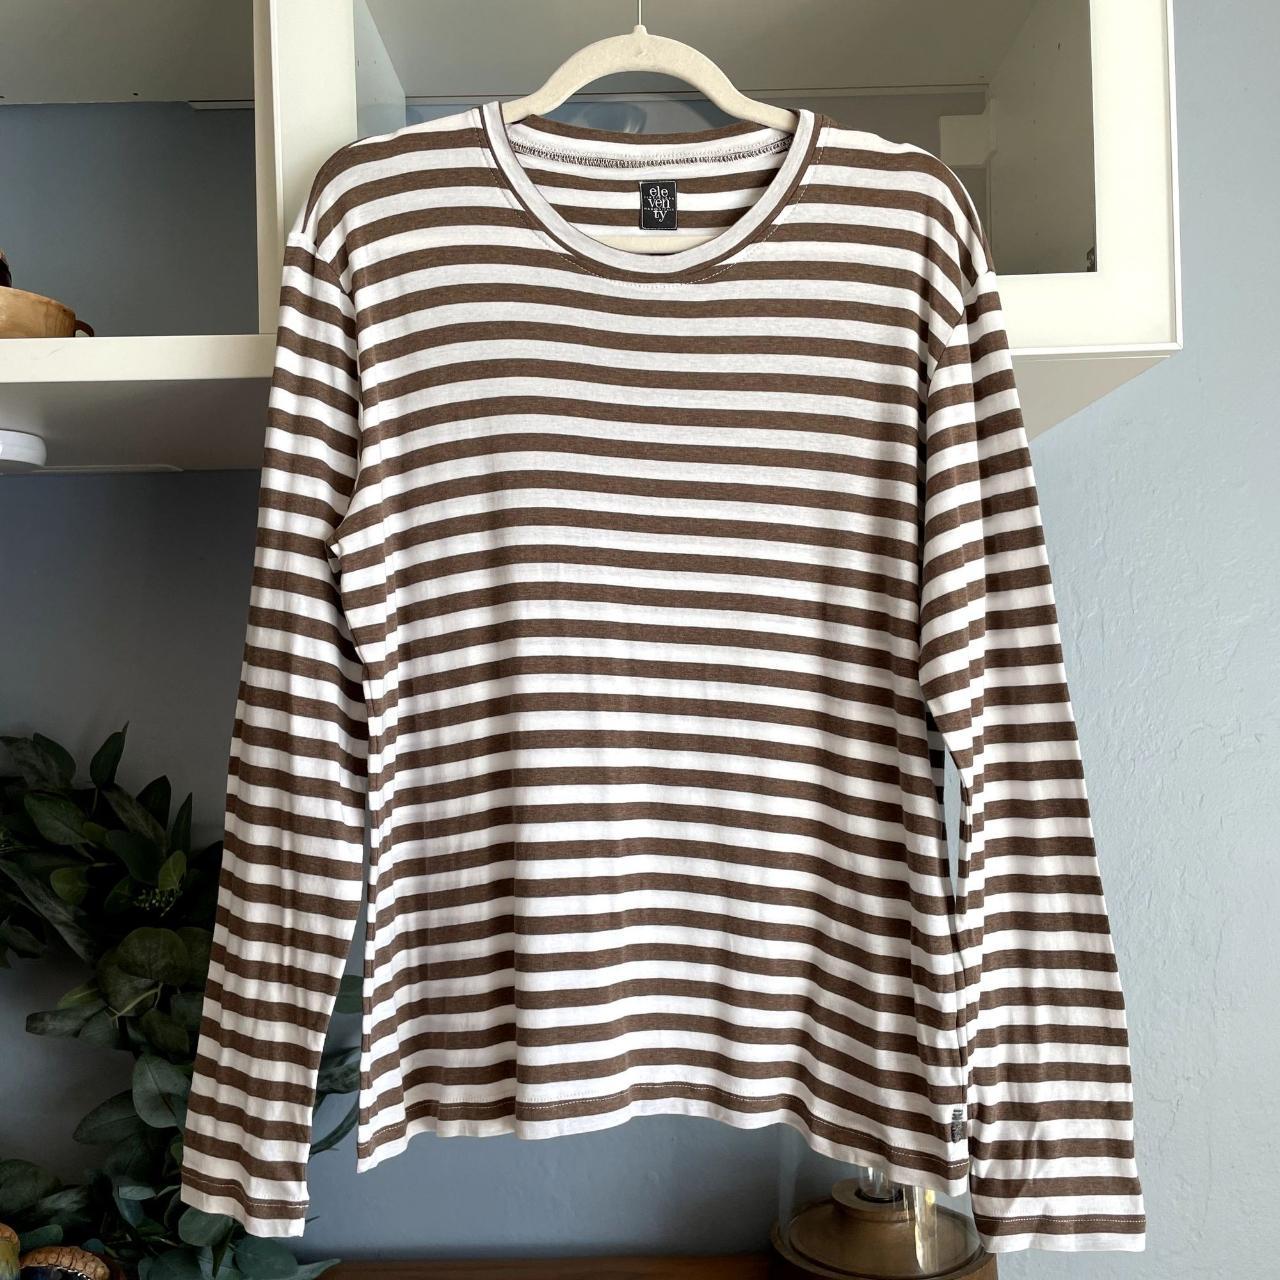 Product Image 1 - Eleventy Striped T-Shirt Brown White
Size: